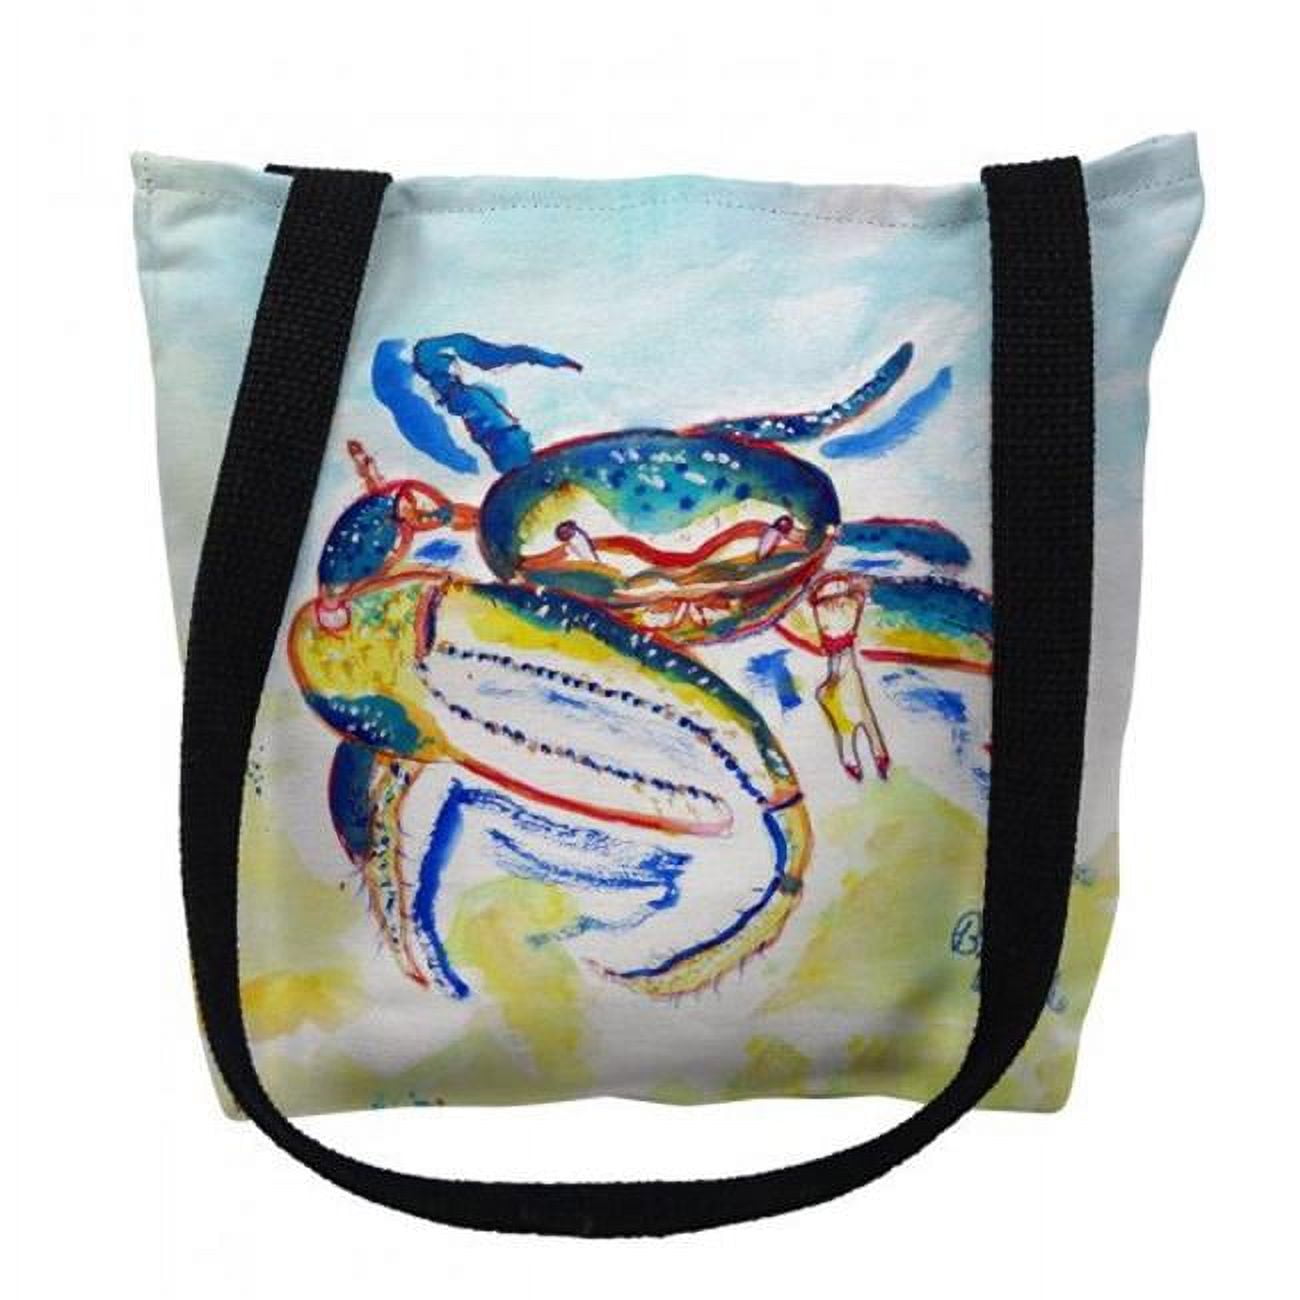 Ty1013m 16 X 16 In. Colorful Fiddler Crab Tote Bag - Medium